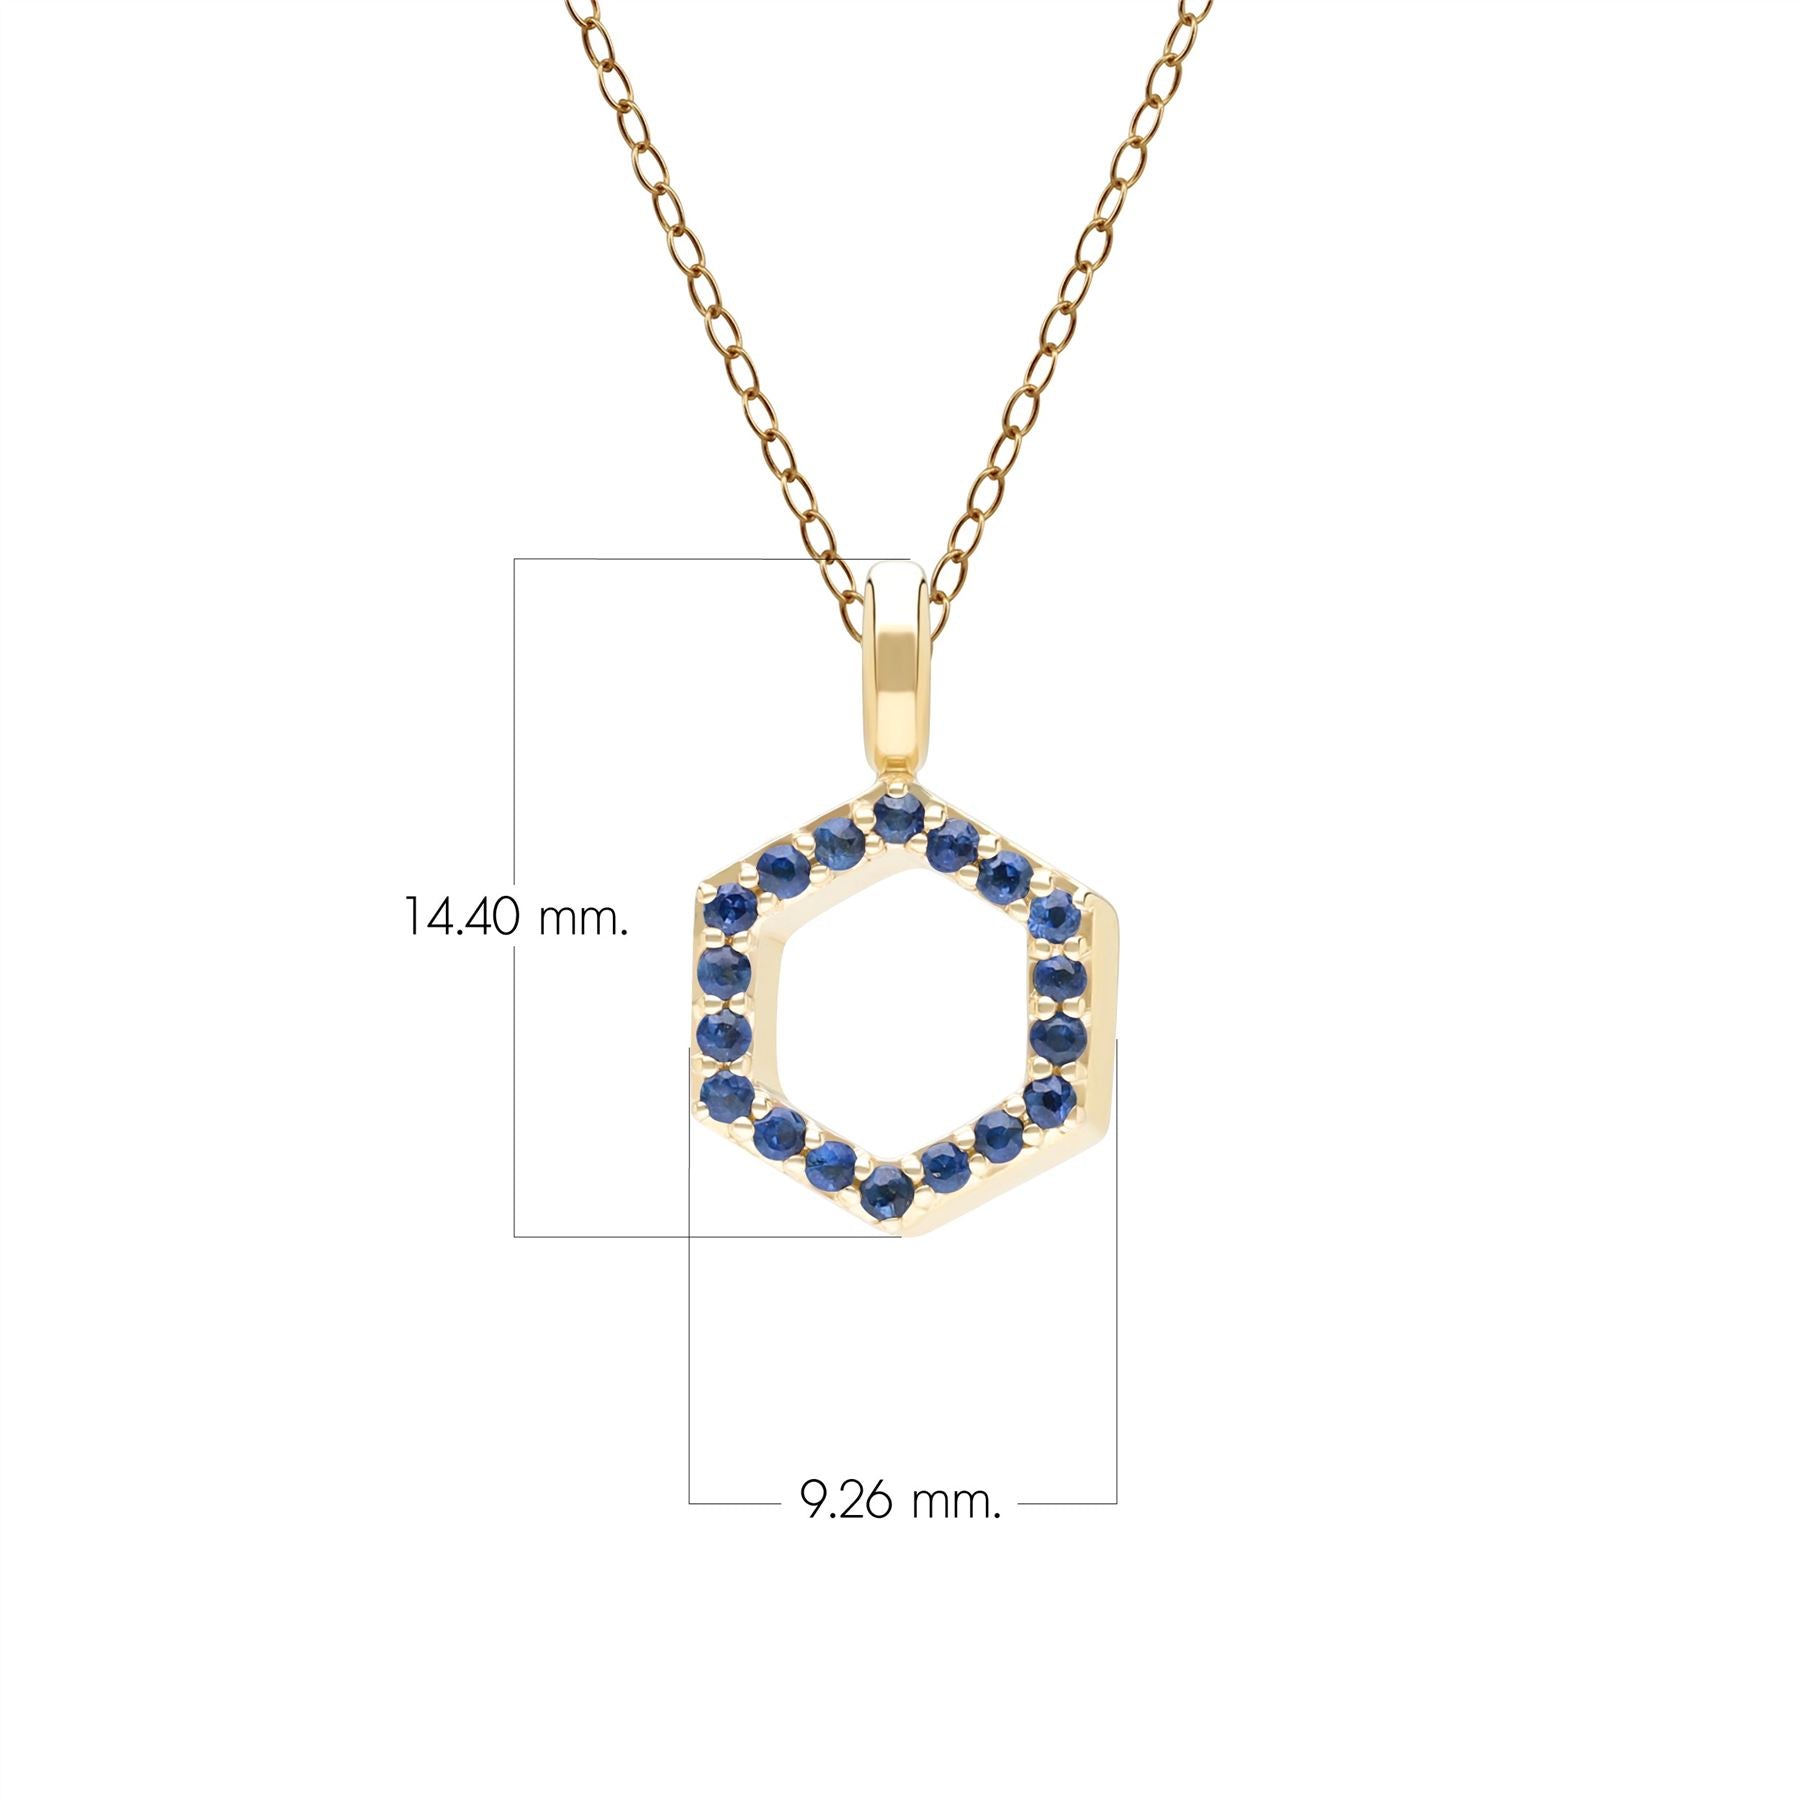 Geometric Hex Sapphire Pendant Necklace in 9ct Yellow Gold Dimensions 